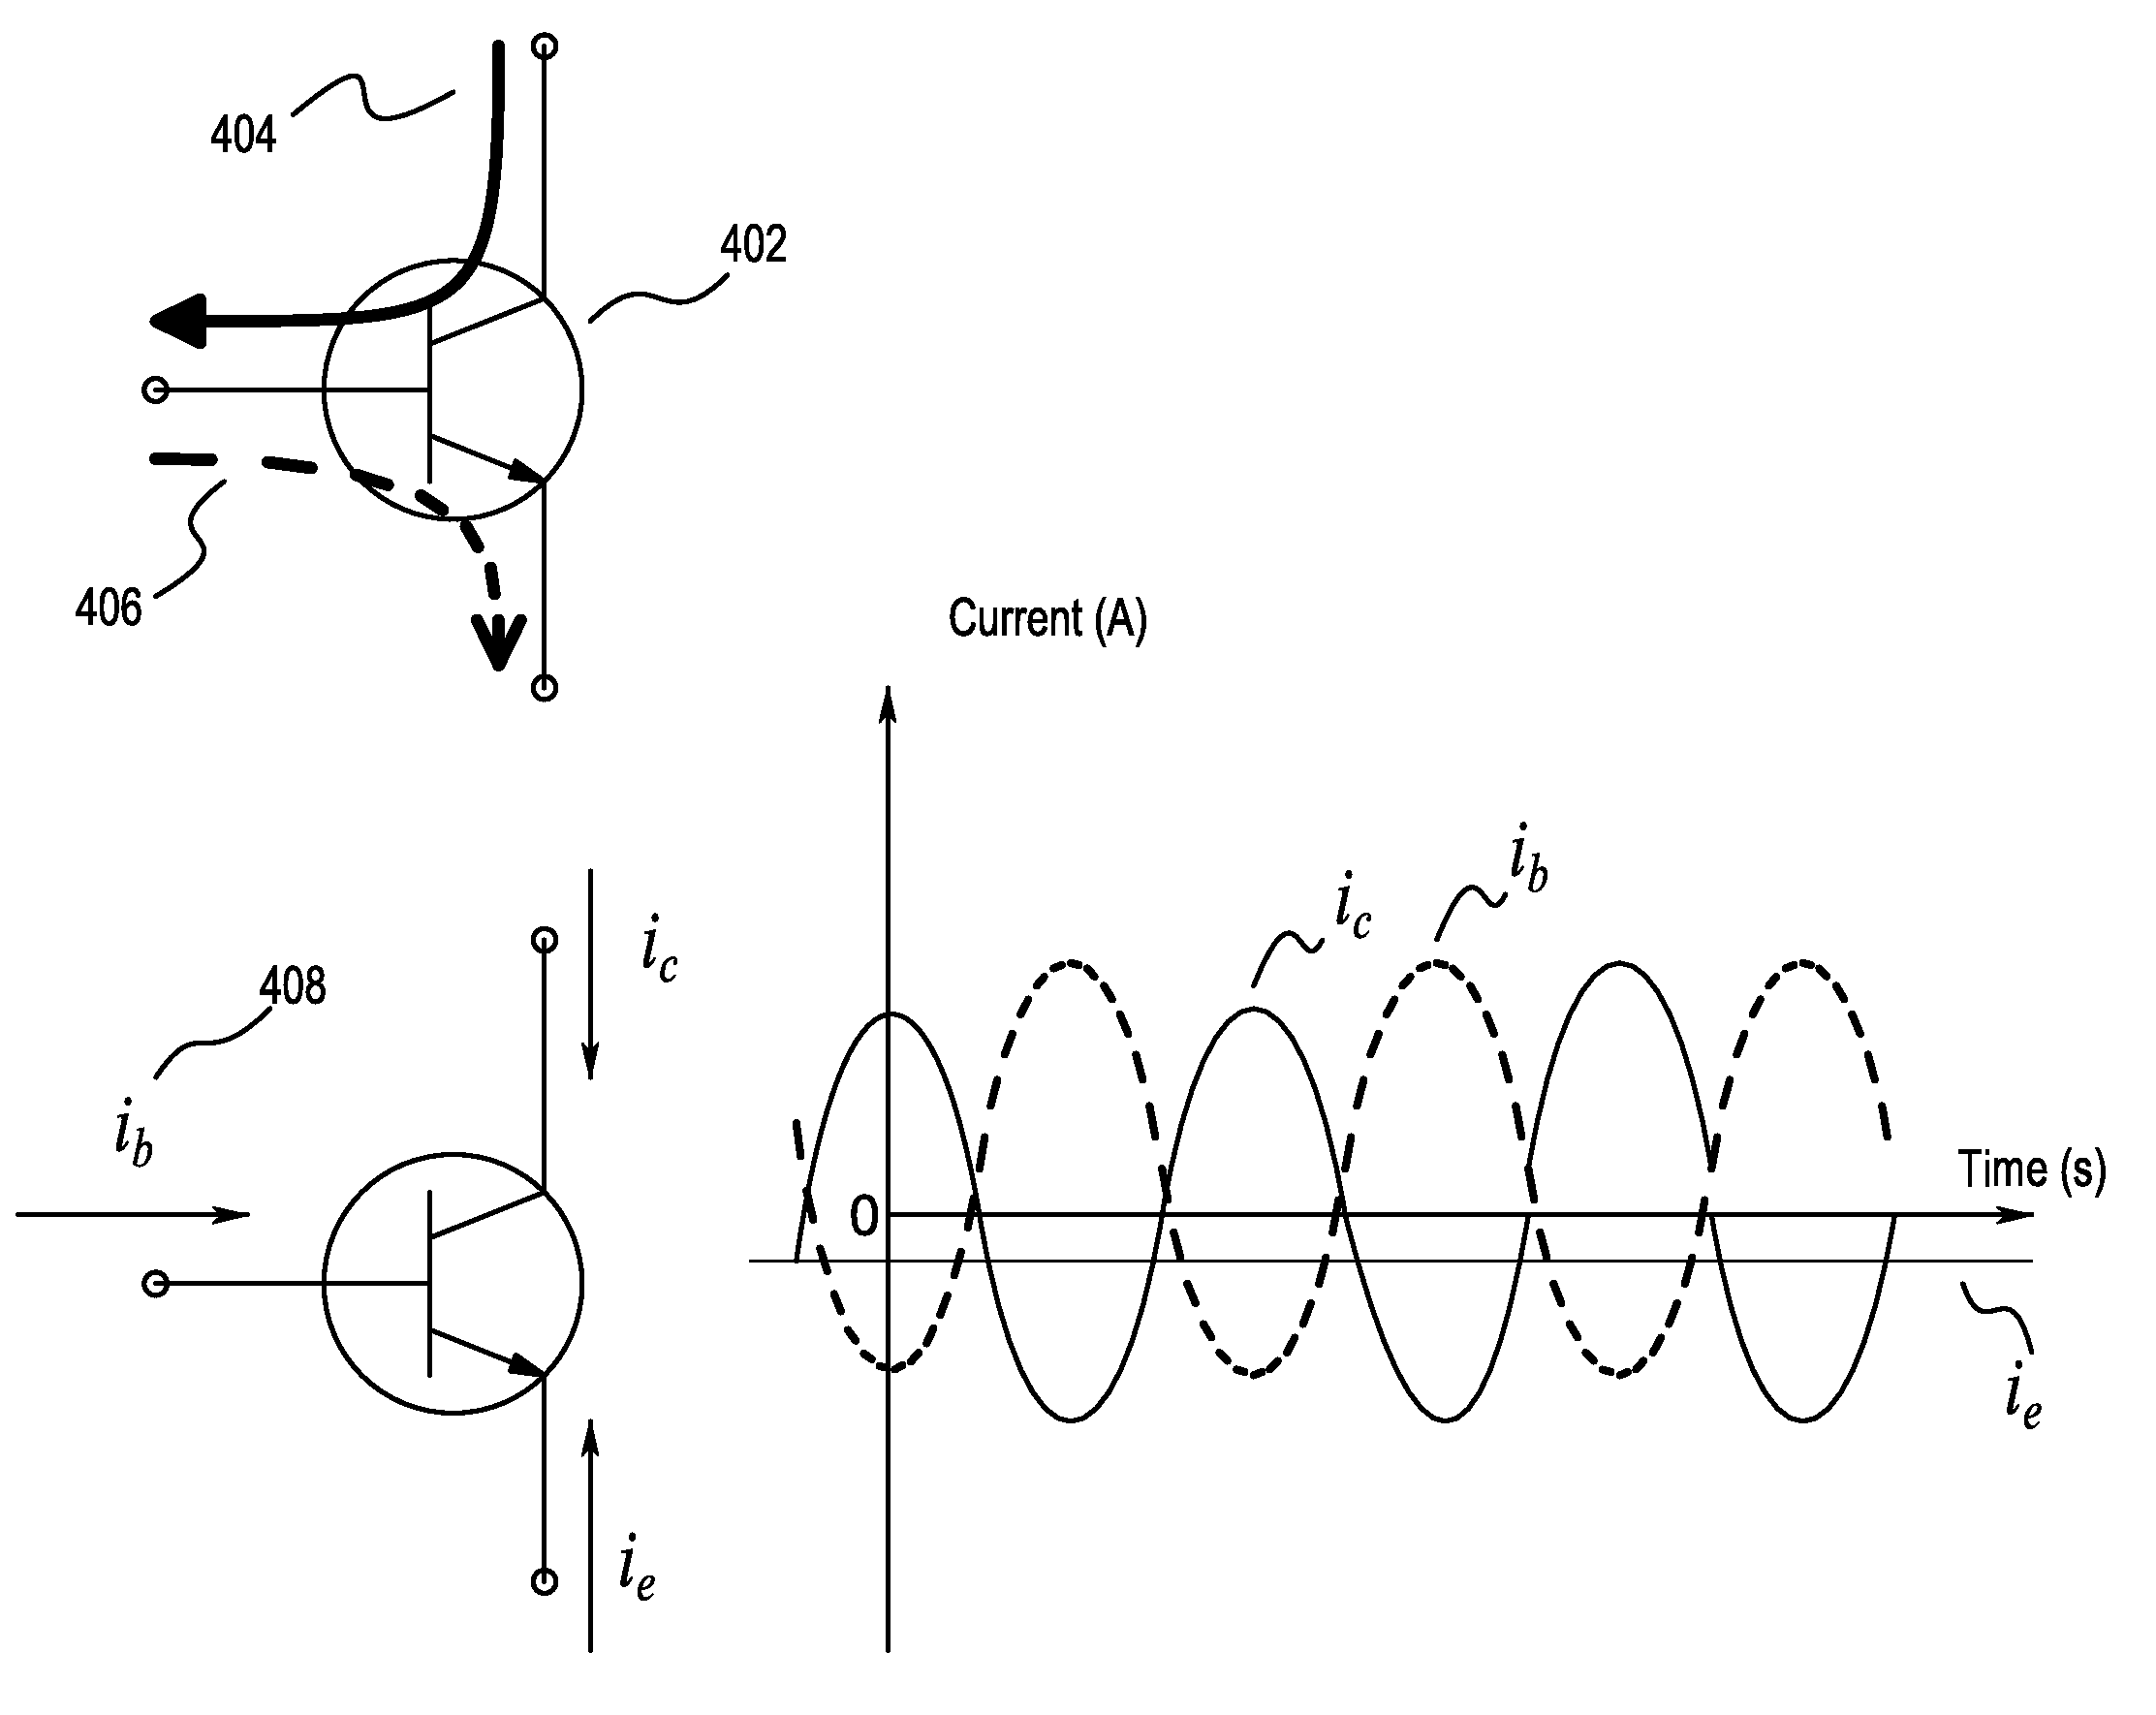 Impedance-matching network using BJT switches in variable-reactance circuits